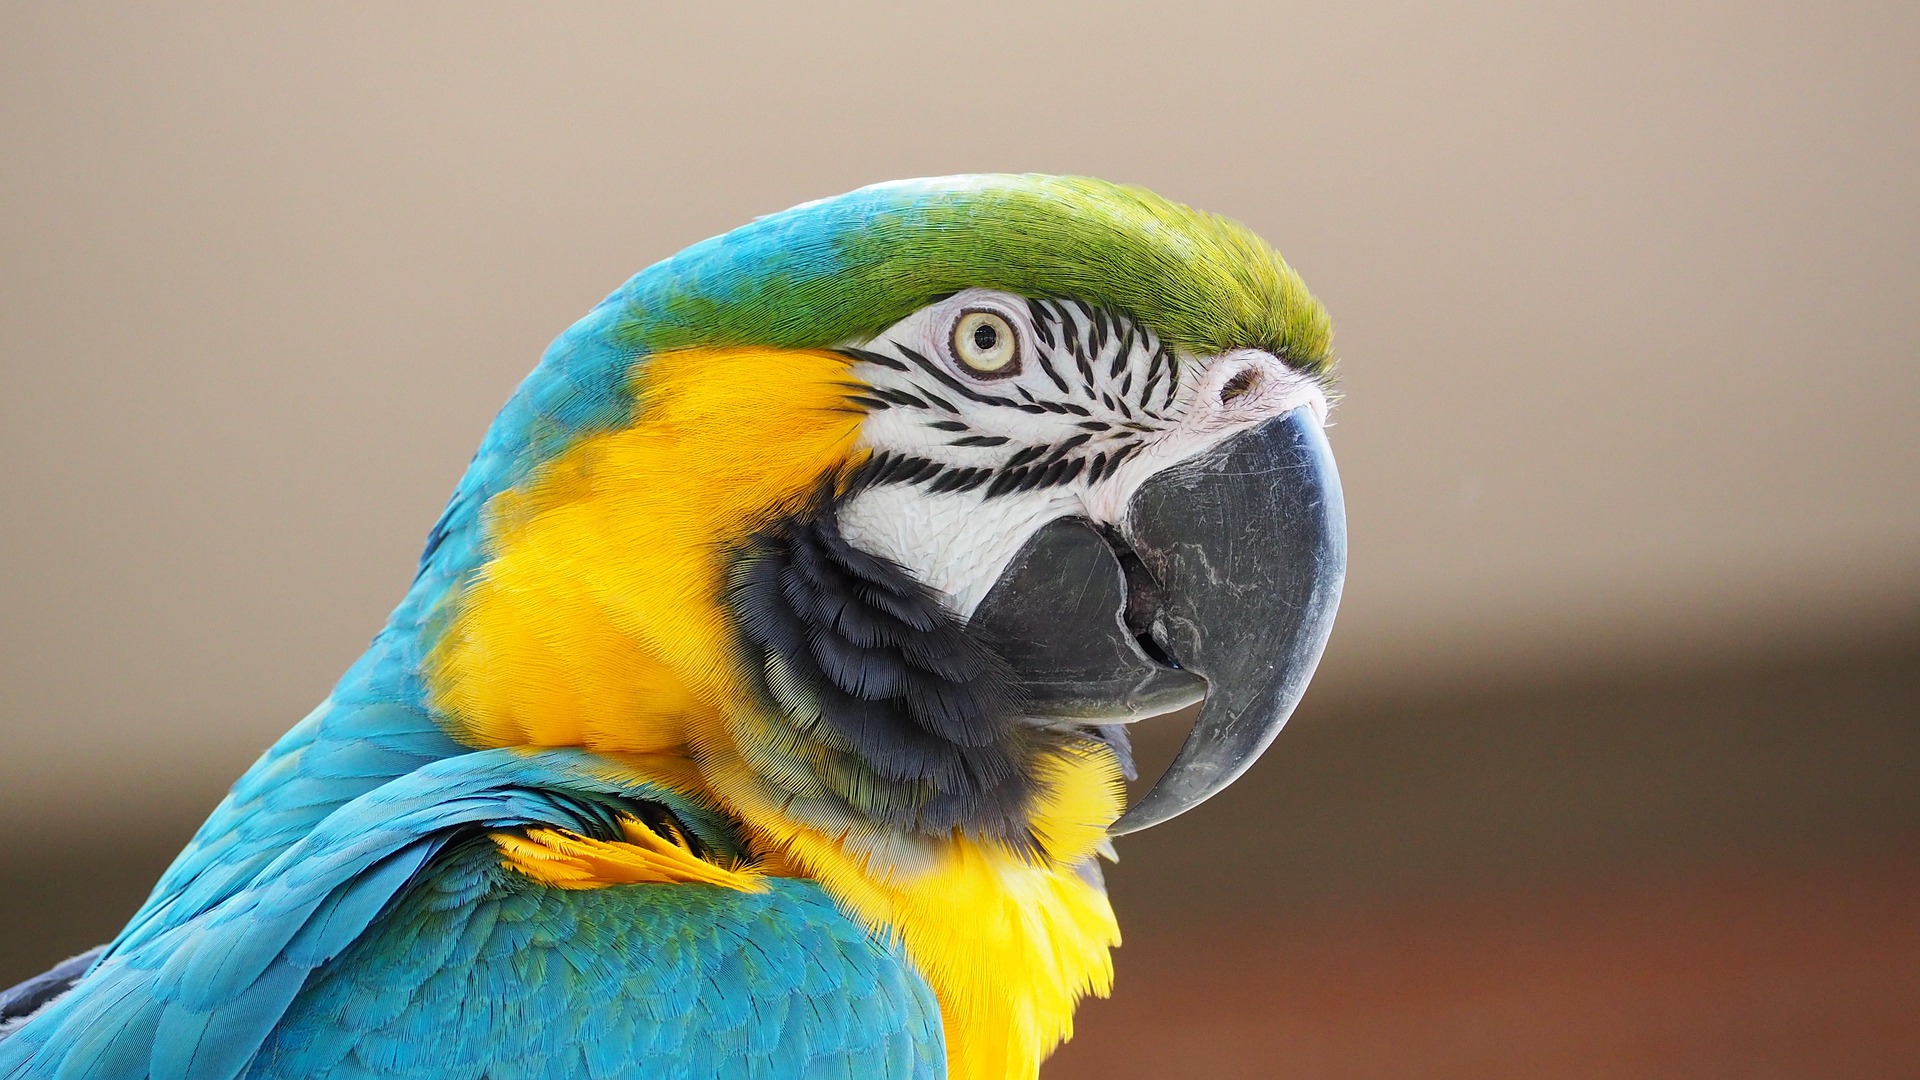 A blue and yellow macaw, commonly seen in the Amazon. Pixabay